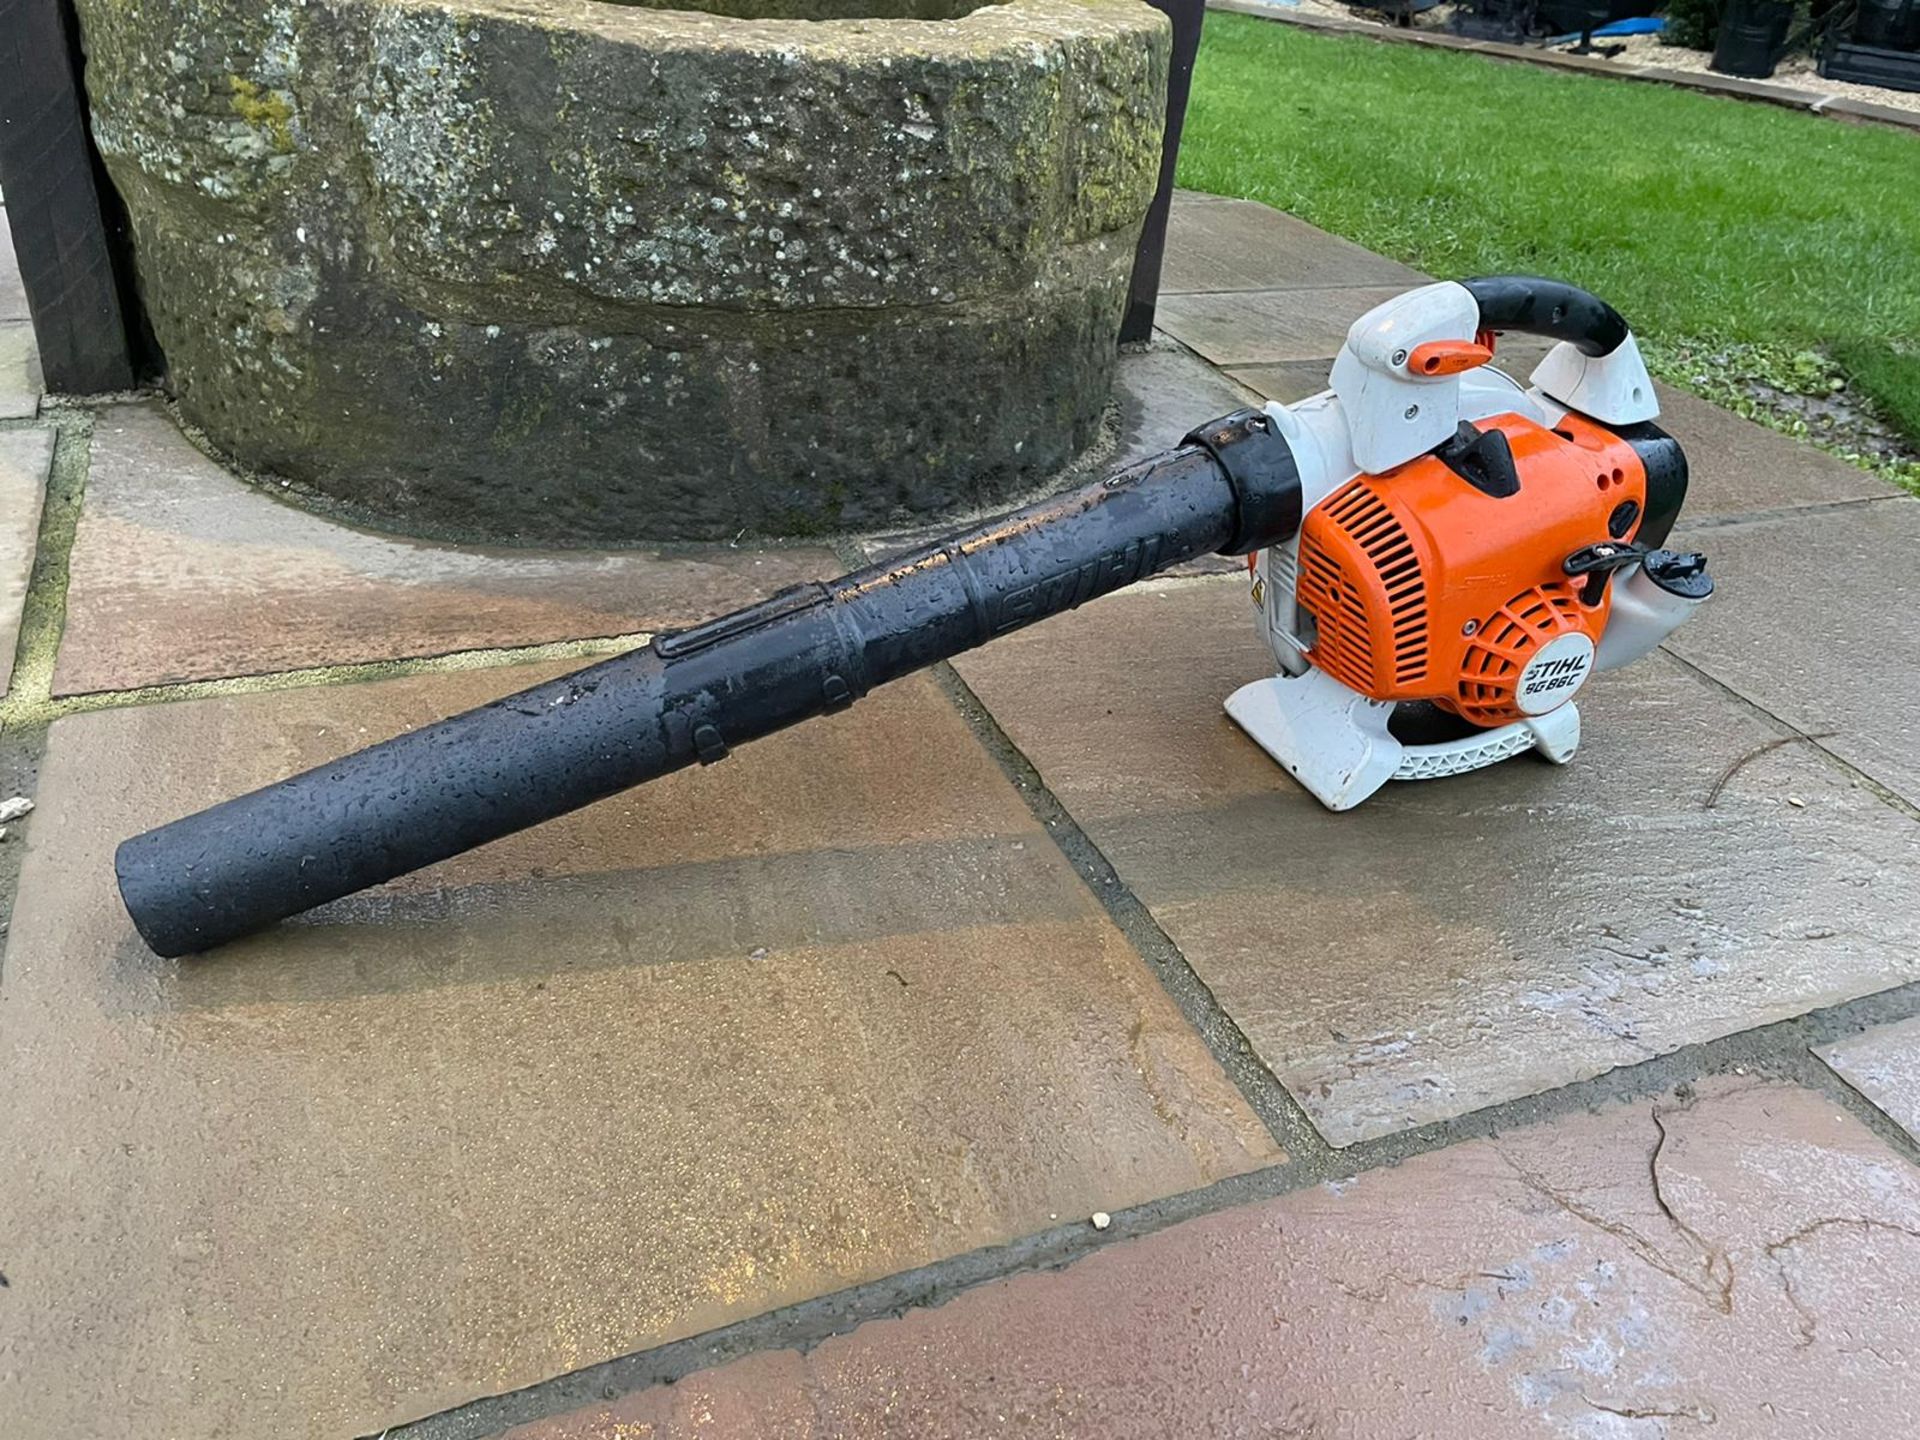 STIHL BG86C-E LEAF BLOWER, RUNS AND WORKS, CLEAN MACHINE, BOUGHT BRAND NEW 2 YEARS AGO *NO VAT* - Image 3 of 4